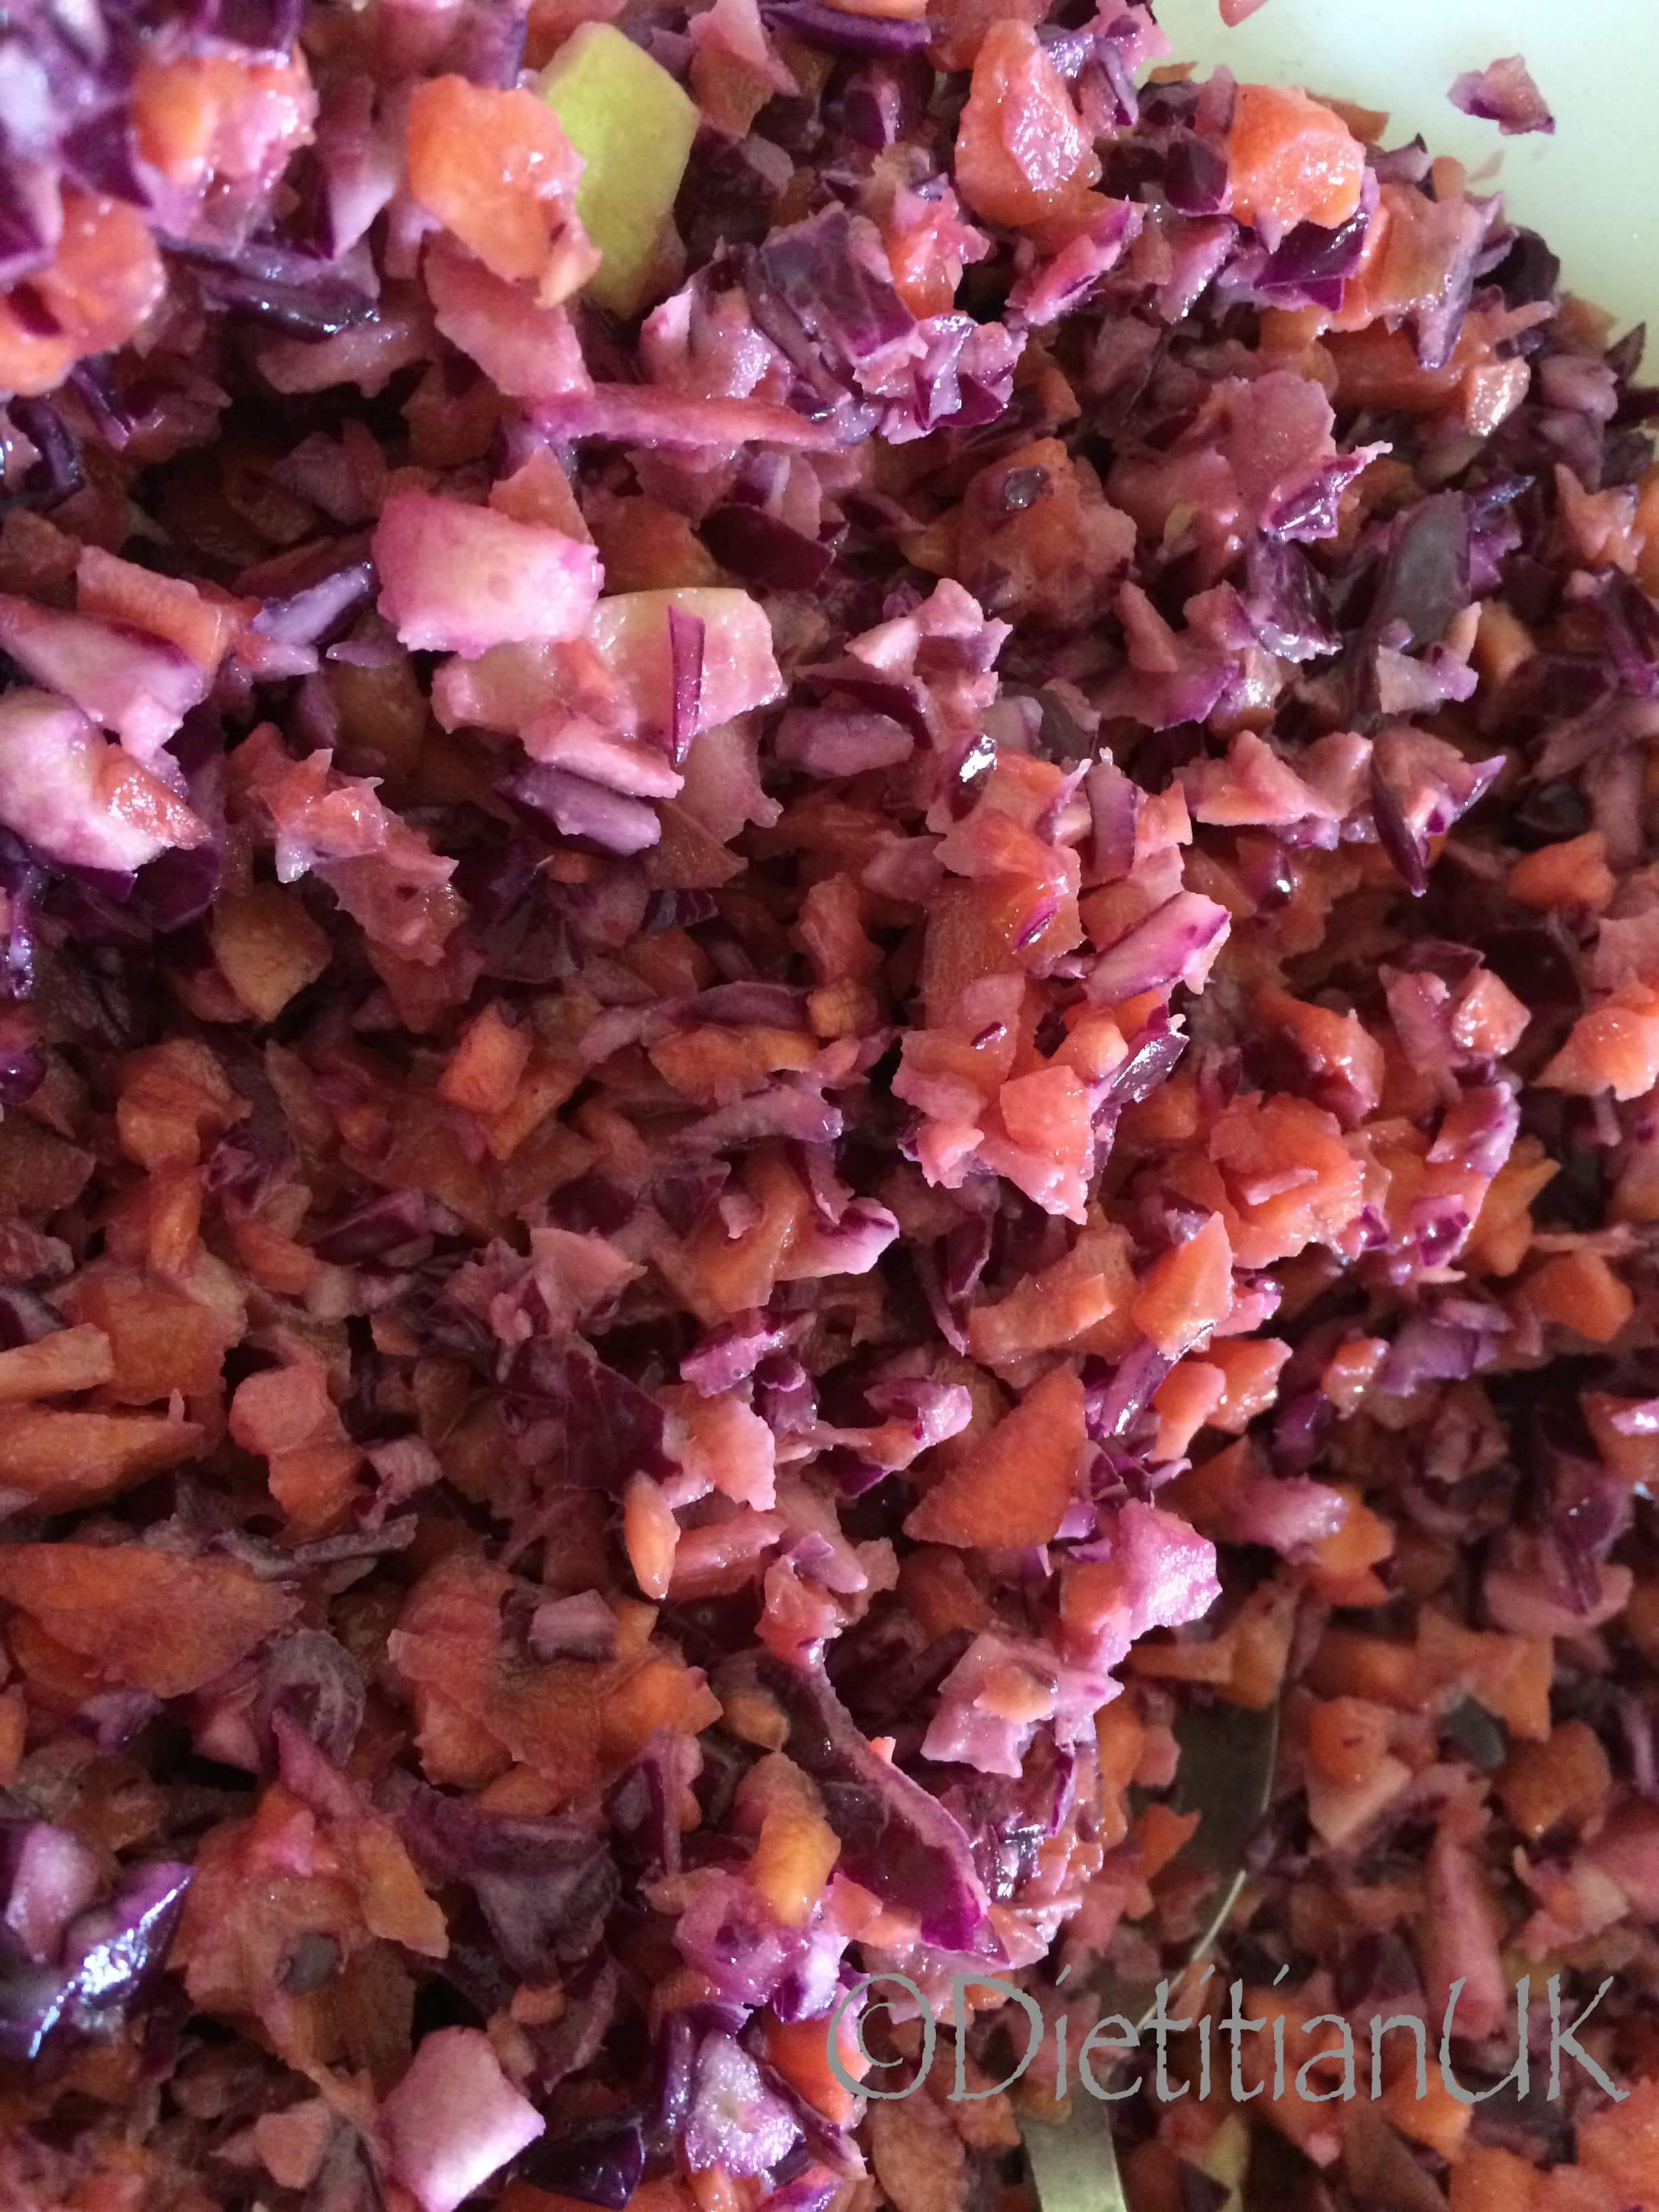 Dietitian UK: Red Cabbage, apple and carrot slaw (healthy coleslaw recipe)